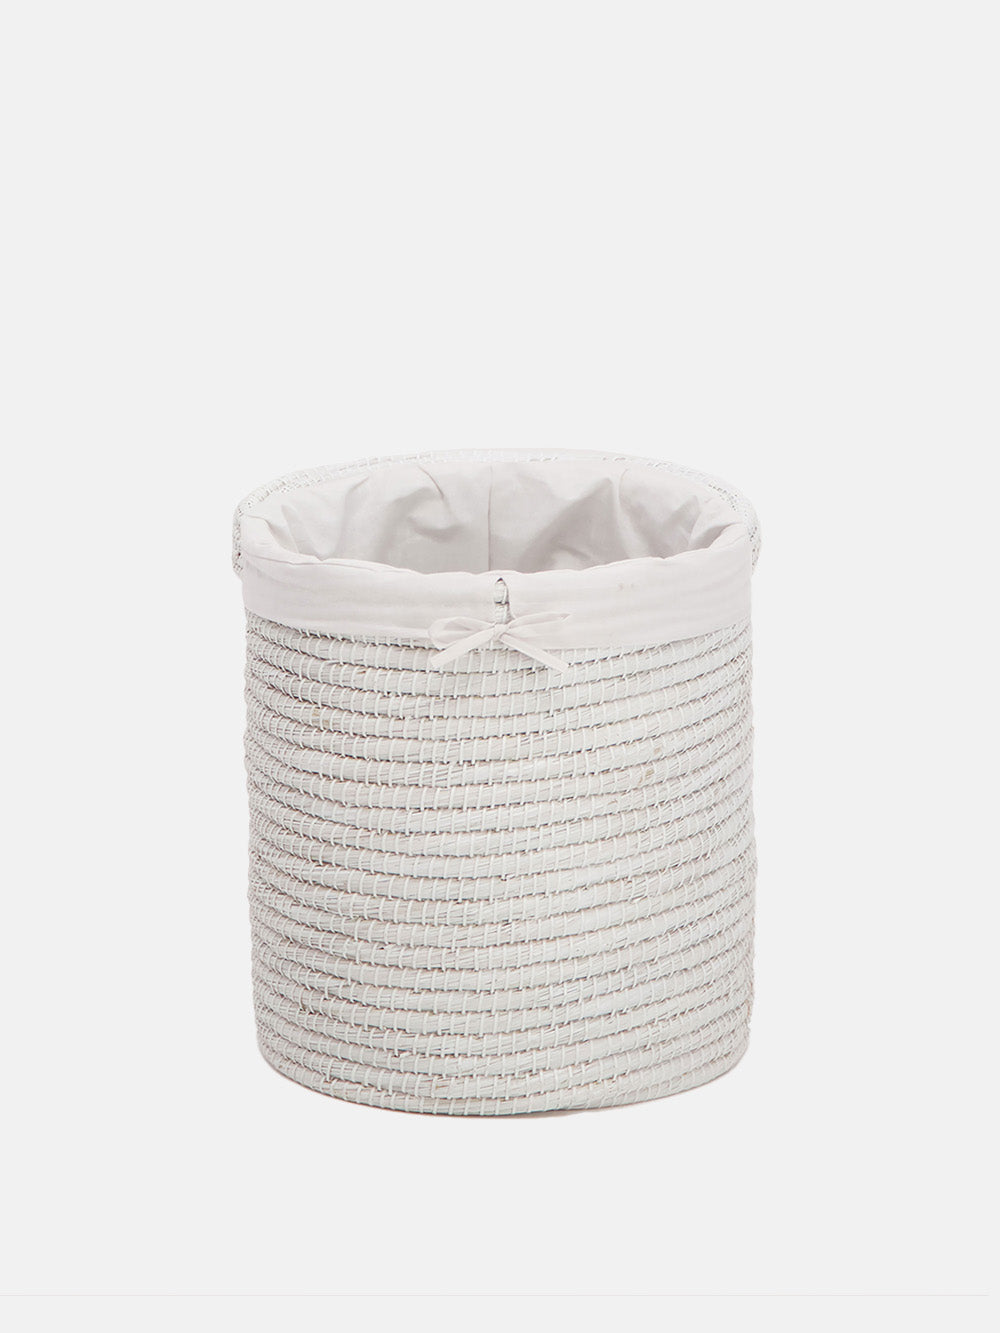 Grass Woven Laundry Hamper with Liner (L)